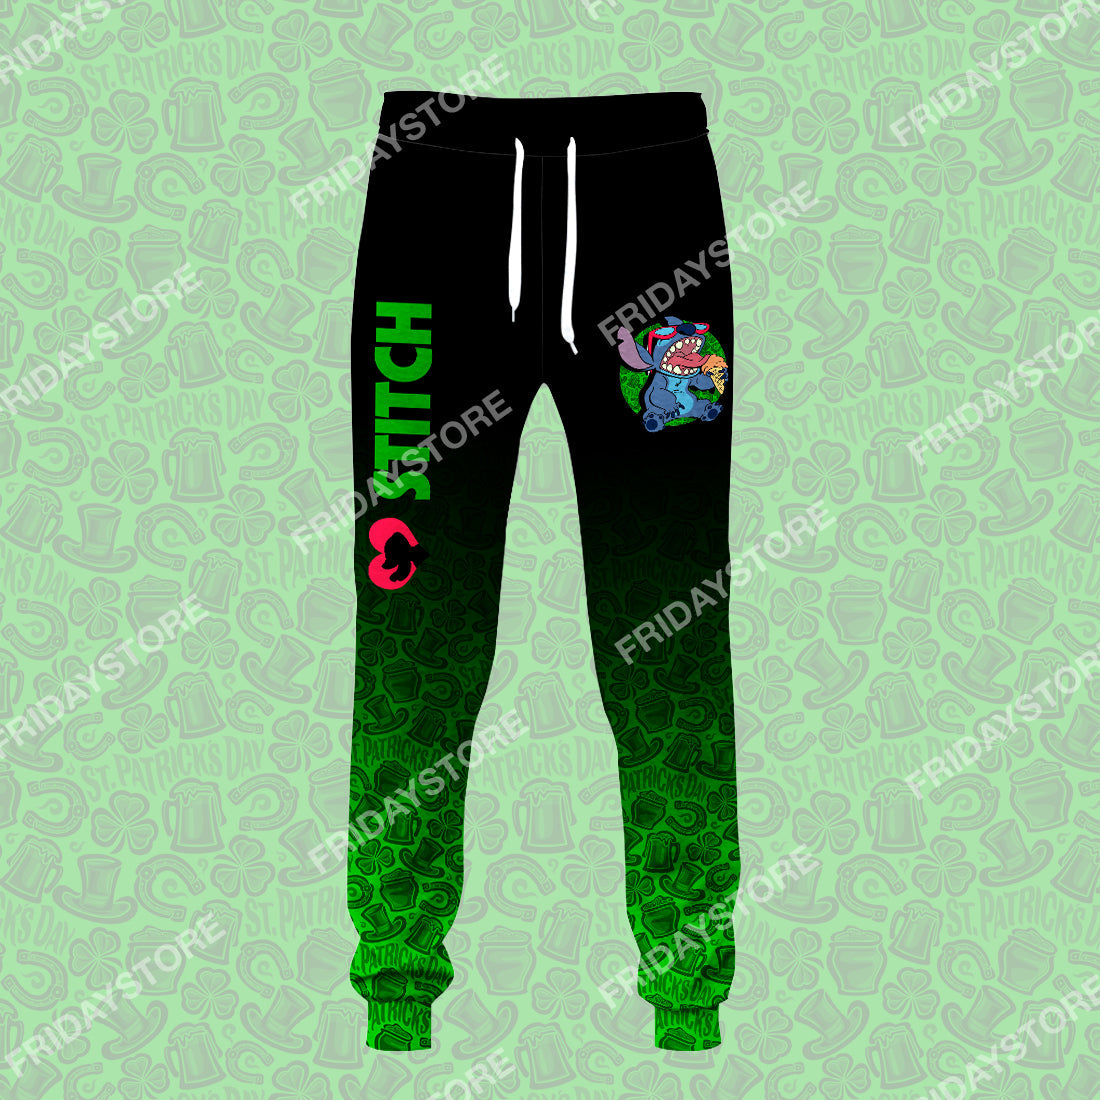 Unifinz LAS Pants My Emotions Patrick's Day Green Jogger Cute Awesome Stitch Pants 2022